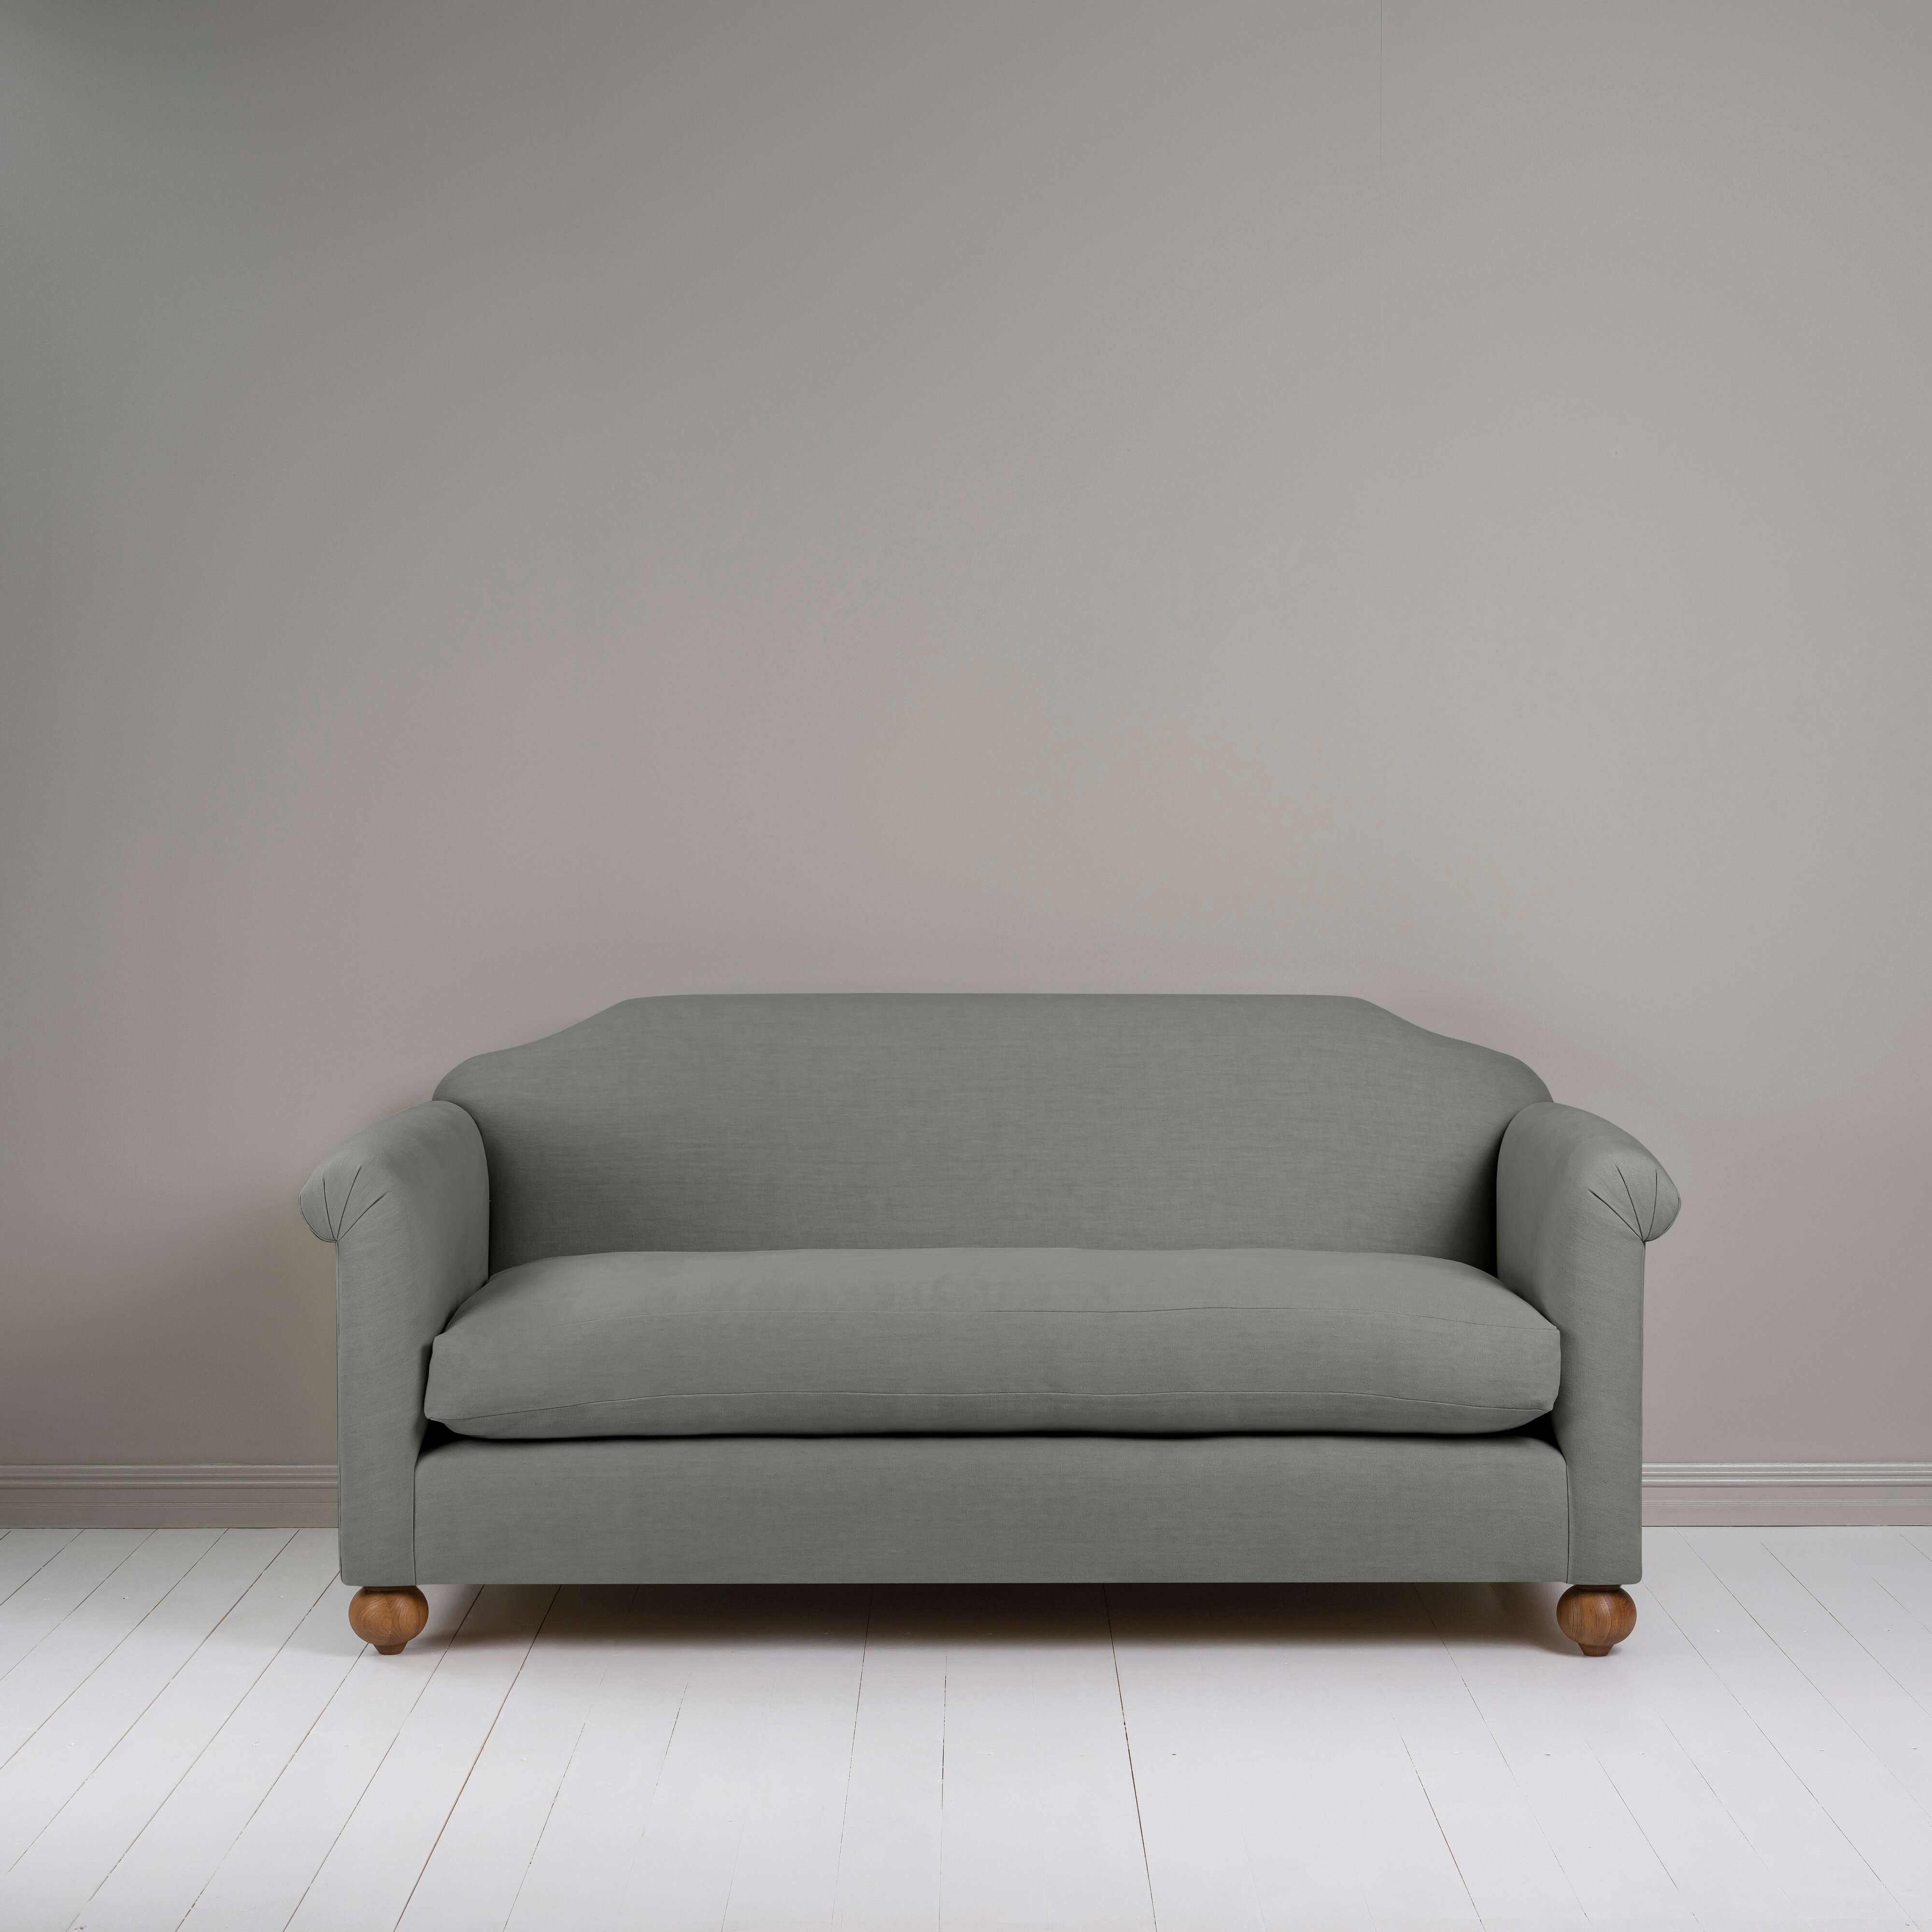  Dolittle 3 Seater Sofa in Laidback Linen Shadow 